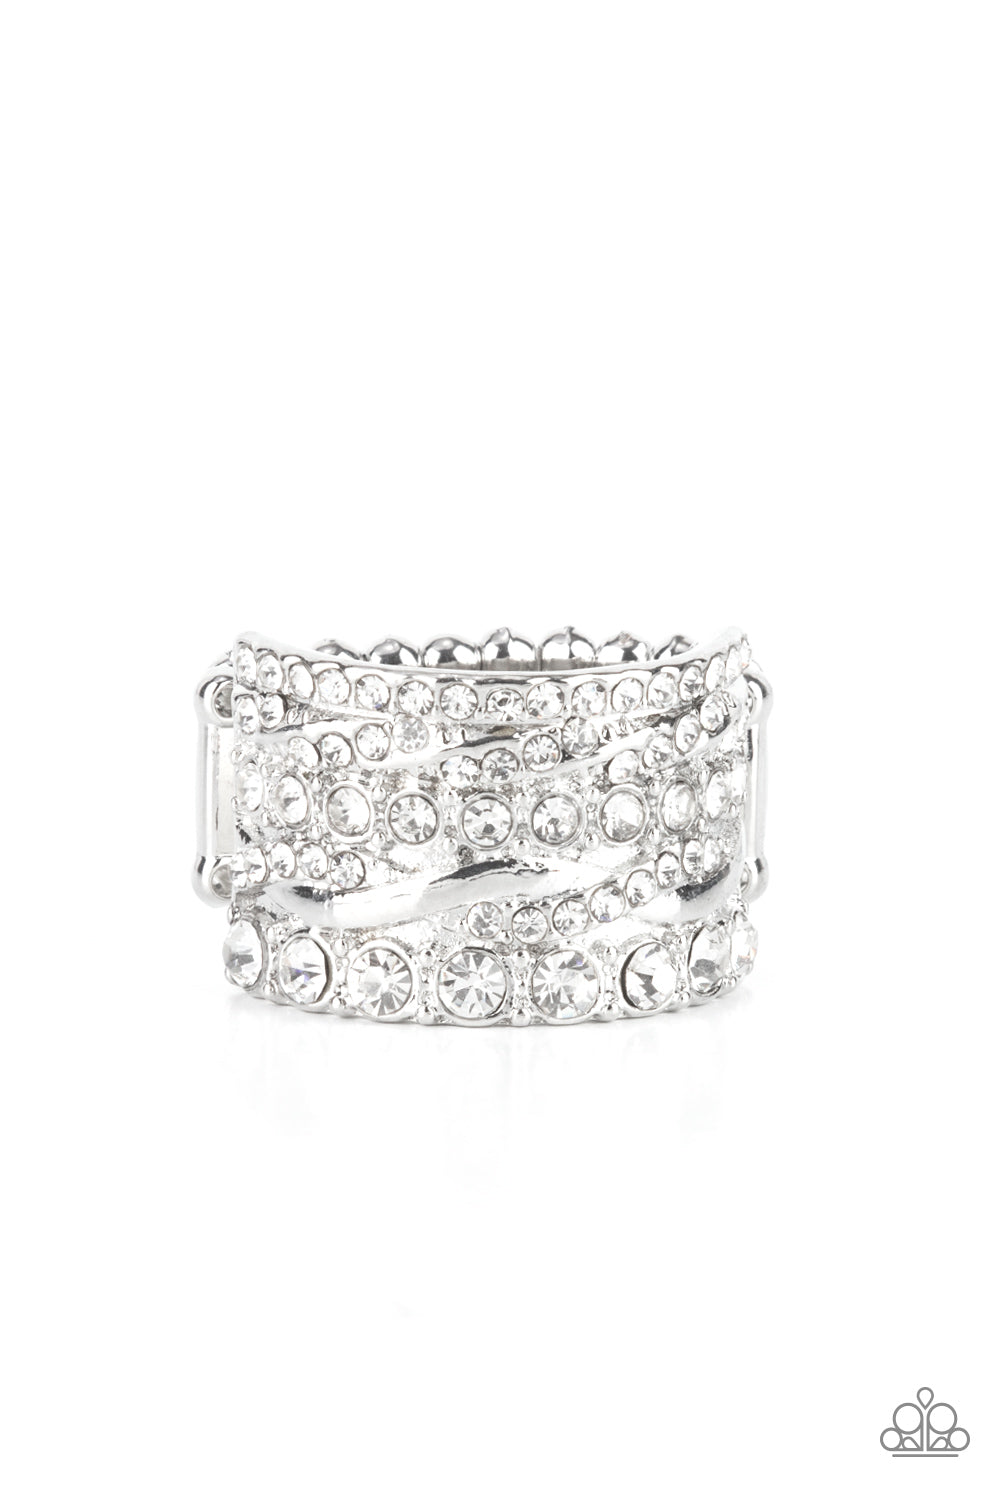 Exclusive Elegance White Ring - October 2021 Life of the Party Exclusive - Princess Glam Shop